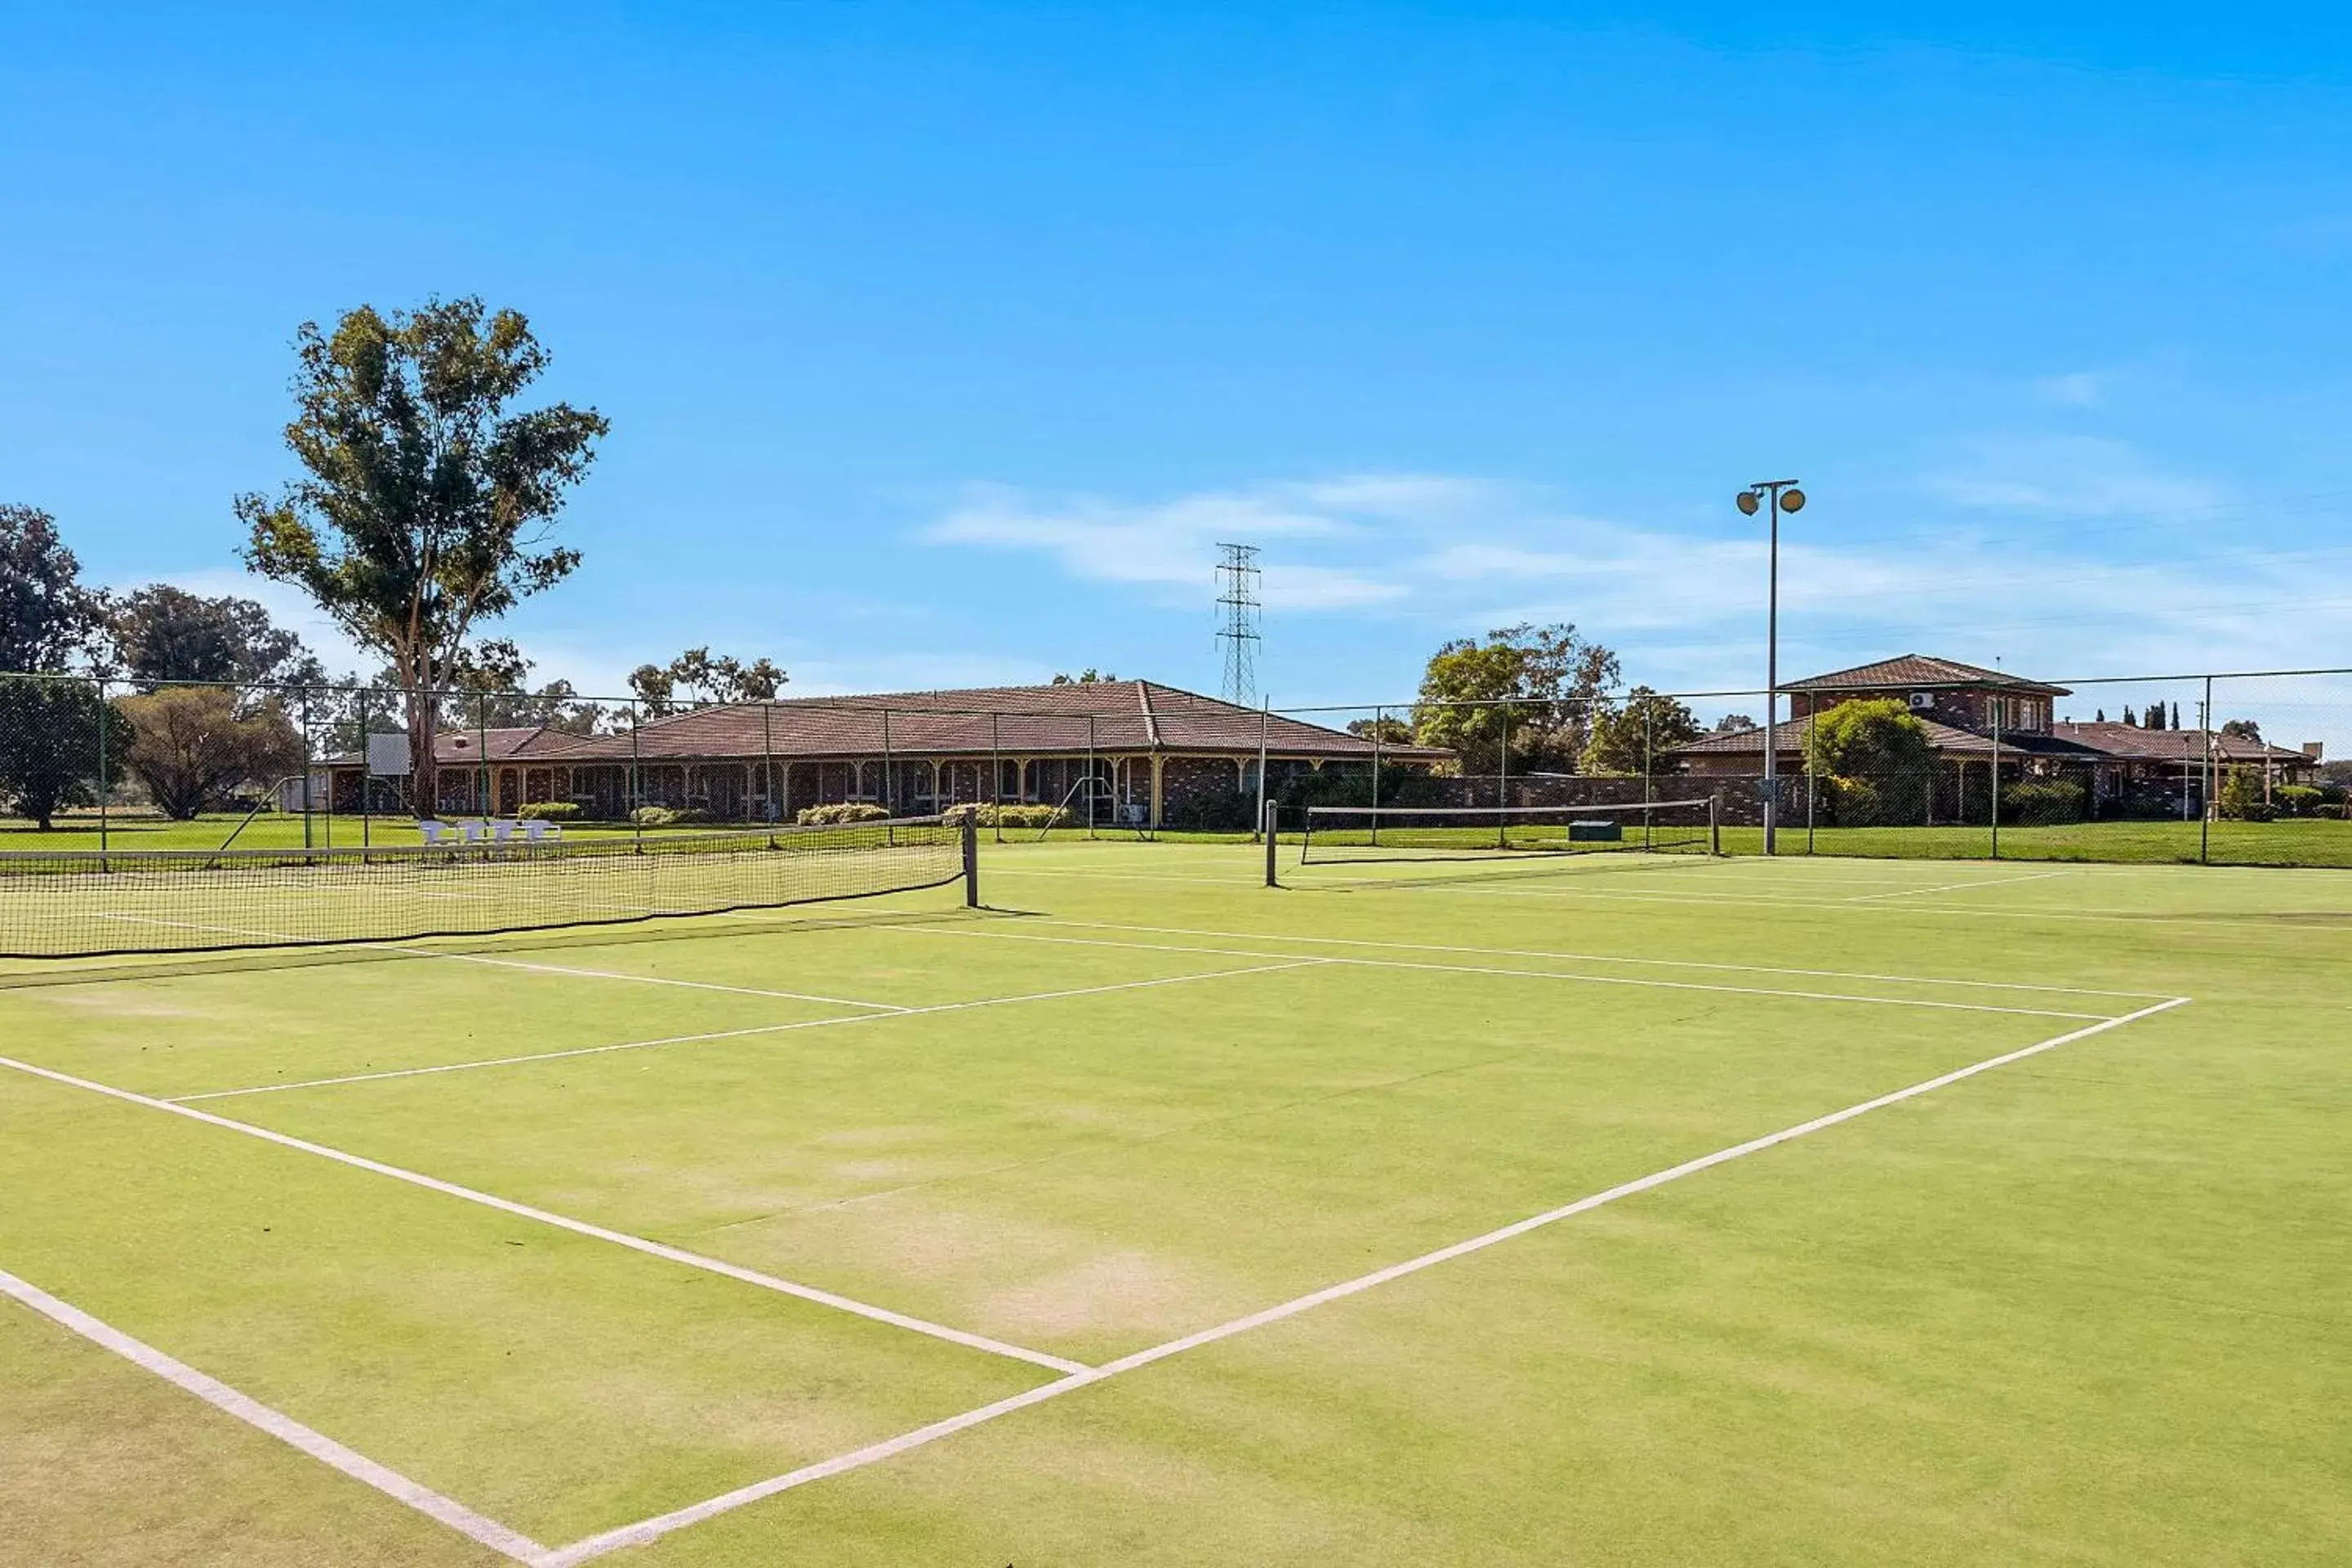 Property building, Tennis/Squash in Quality Inn Carriage House